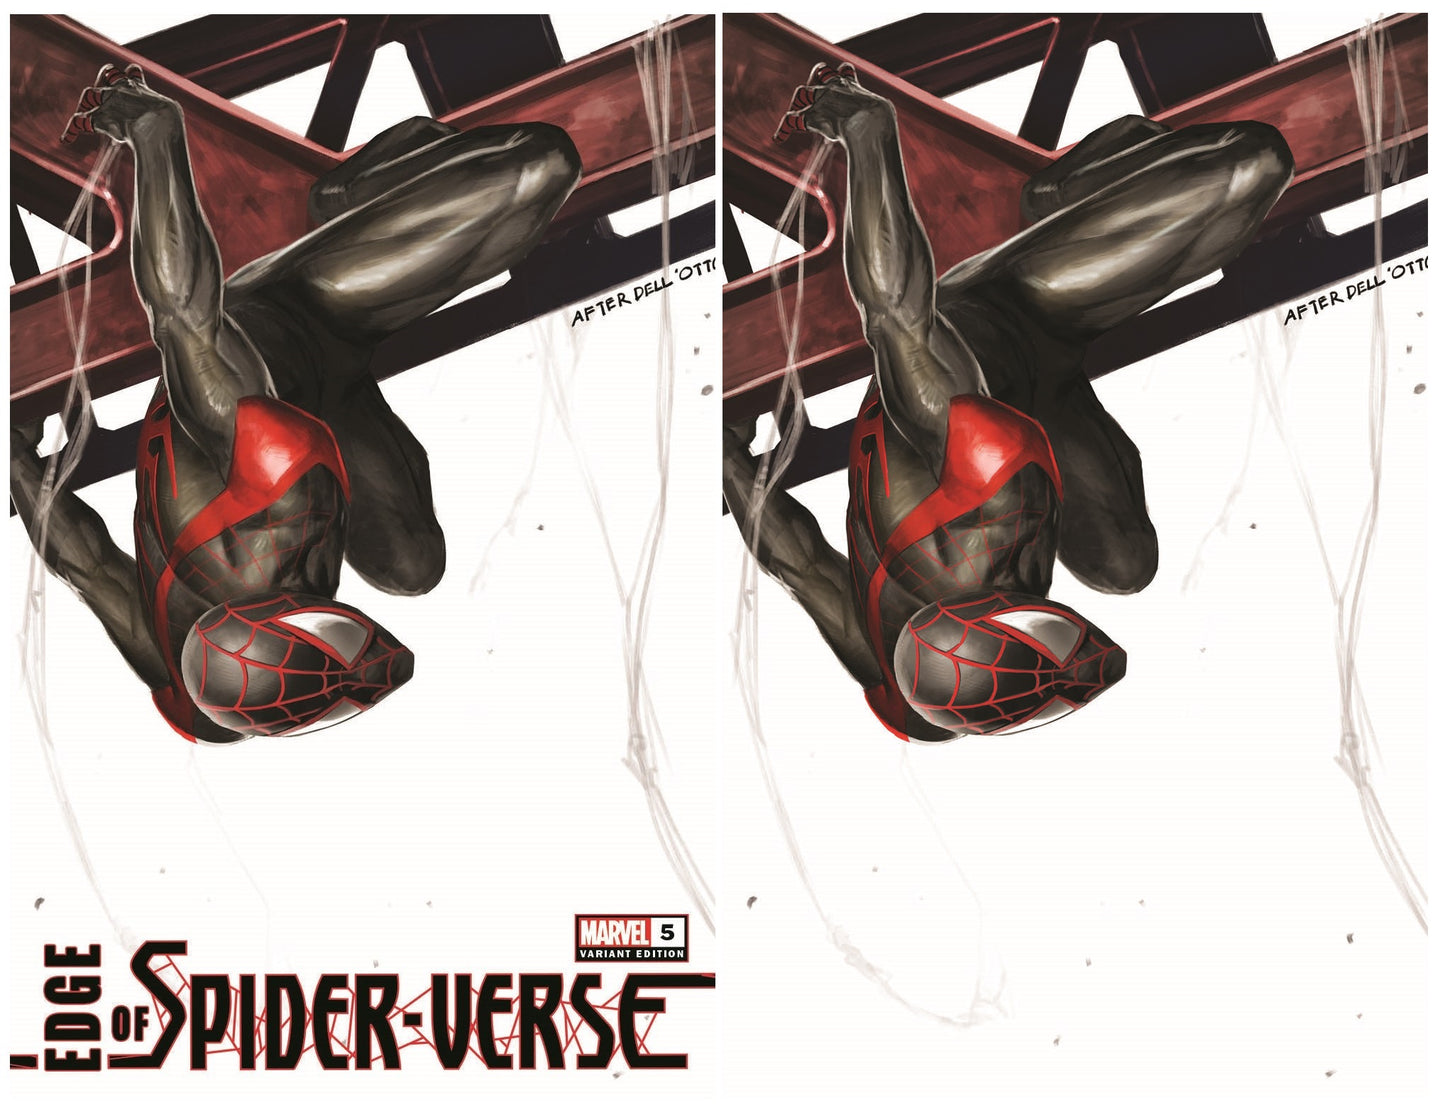 EDGE OF SPIDER-VERSE #5 SKAN SRISUWAN ASM 667 DELL'OTTO HOMAGE TRADE/VIRGIN VARIANT SETS LIMITED TO 800 SETS WITH NUMBERED COA